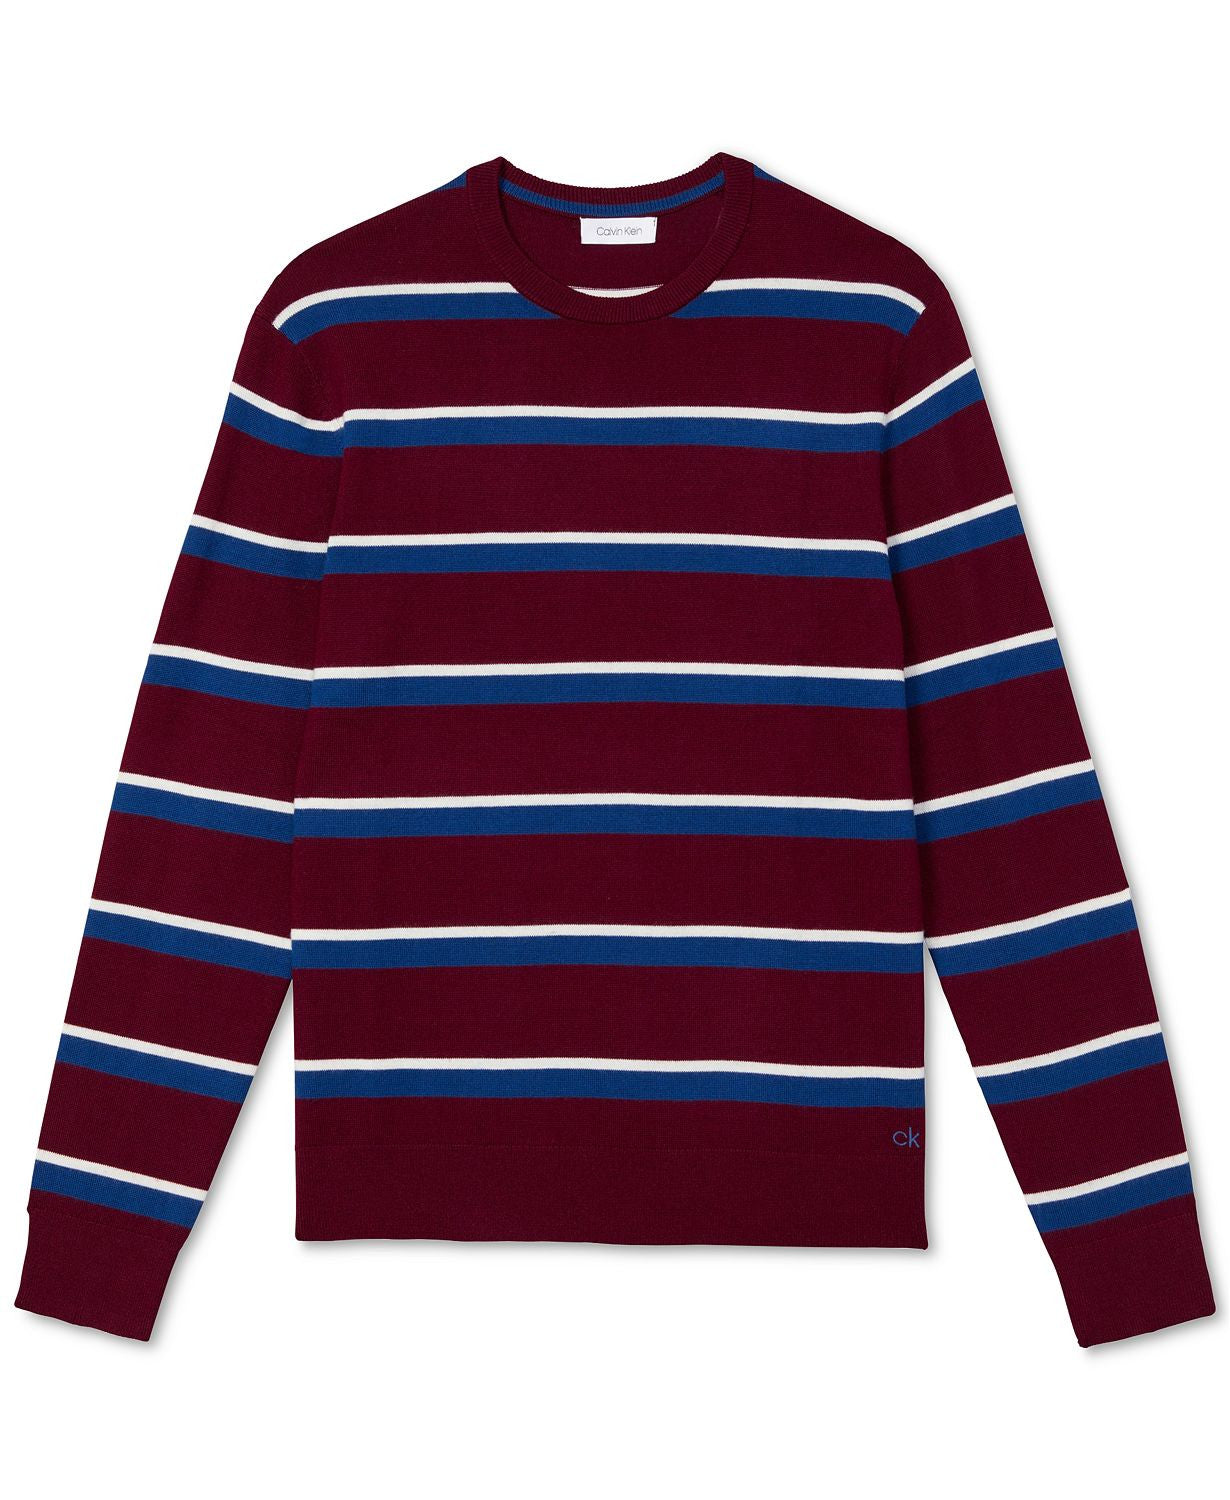 Calvin Klein Bi-color Striped Sweater Heartwood Red